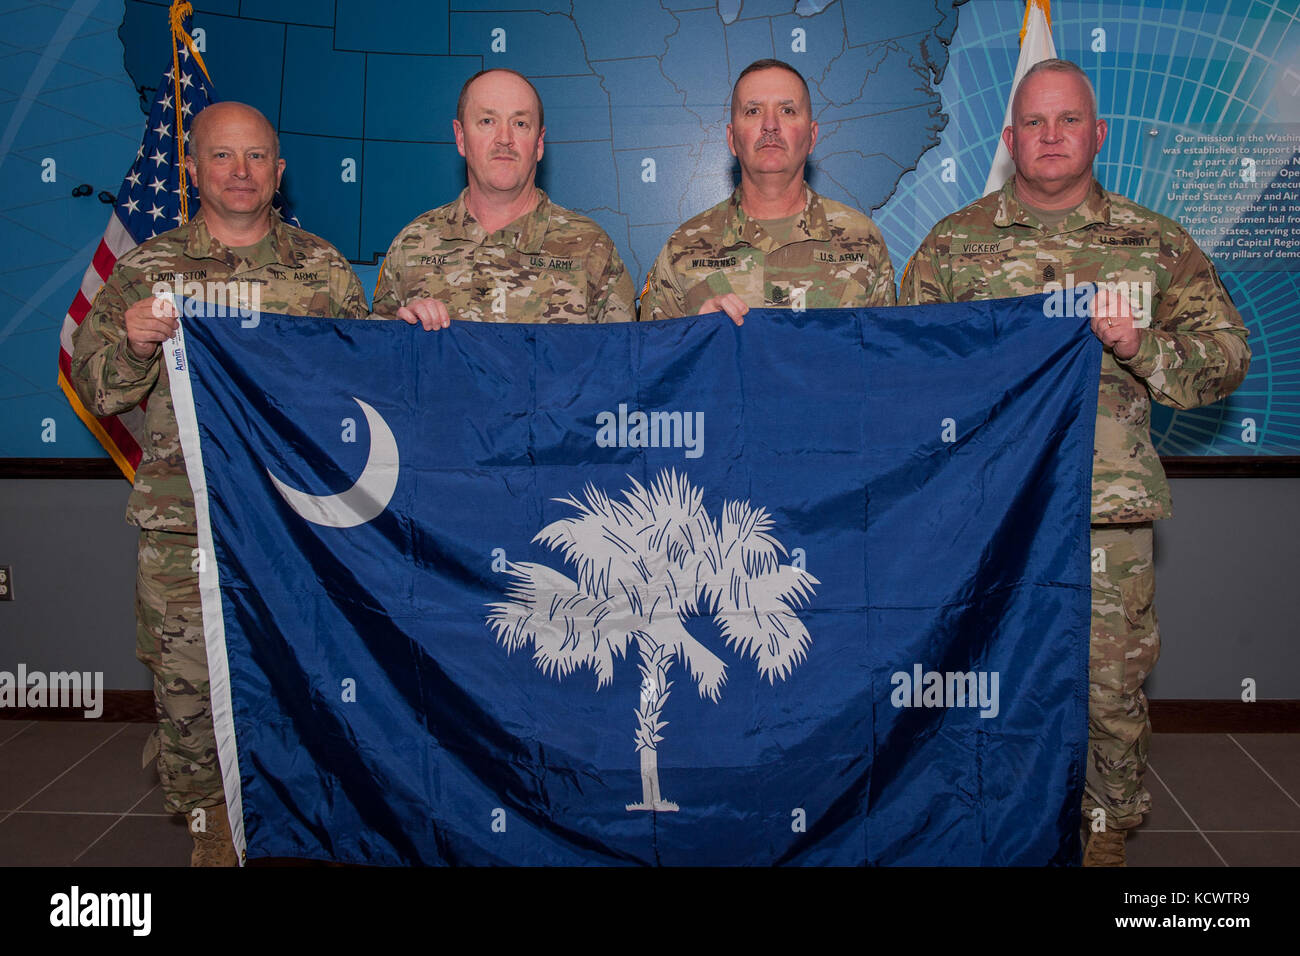 (L-R) U.S. Army Maj. Gen. Robert E. Livingston, Jr., the adjutant general for South Carolina, U.S. Army Col. James D. Peake, Task Force Swamp Fox commander, U.S. Army Command Sgt. Maj. Jamie Wilbanks, Task Force Swamp Fox command sergeant major, and Command Sgt. Maj. Russ Vickery, South Carolina National Guard state command sergeant major, hold the flag for the state of South Carolina at the Joint Air Defense Operations Center on Joint Base Anacostia-Bolling in the District of Columbia, Dec. 21, 2016.  Livingston  presented the flag, which was recently flown over the South Carolina state capit Stock Photo